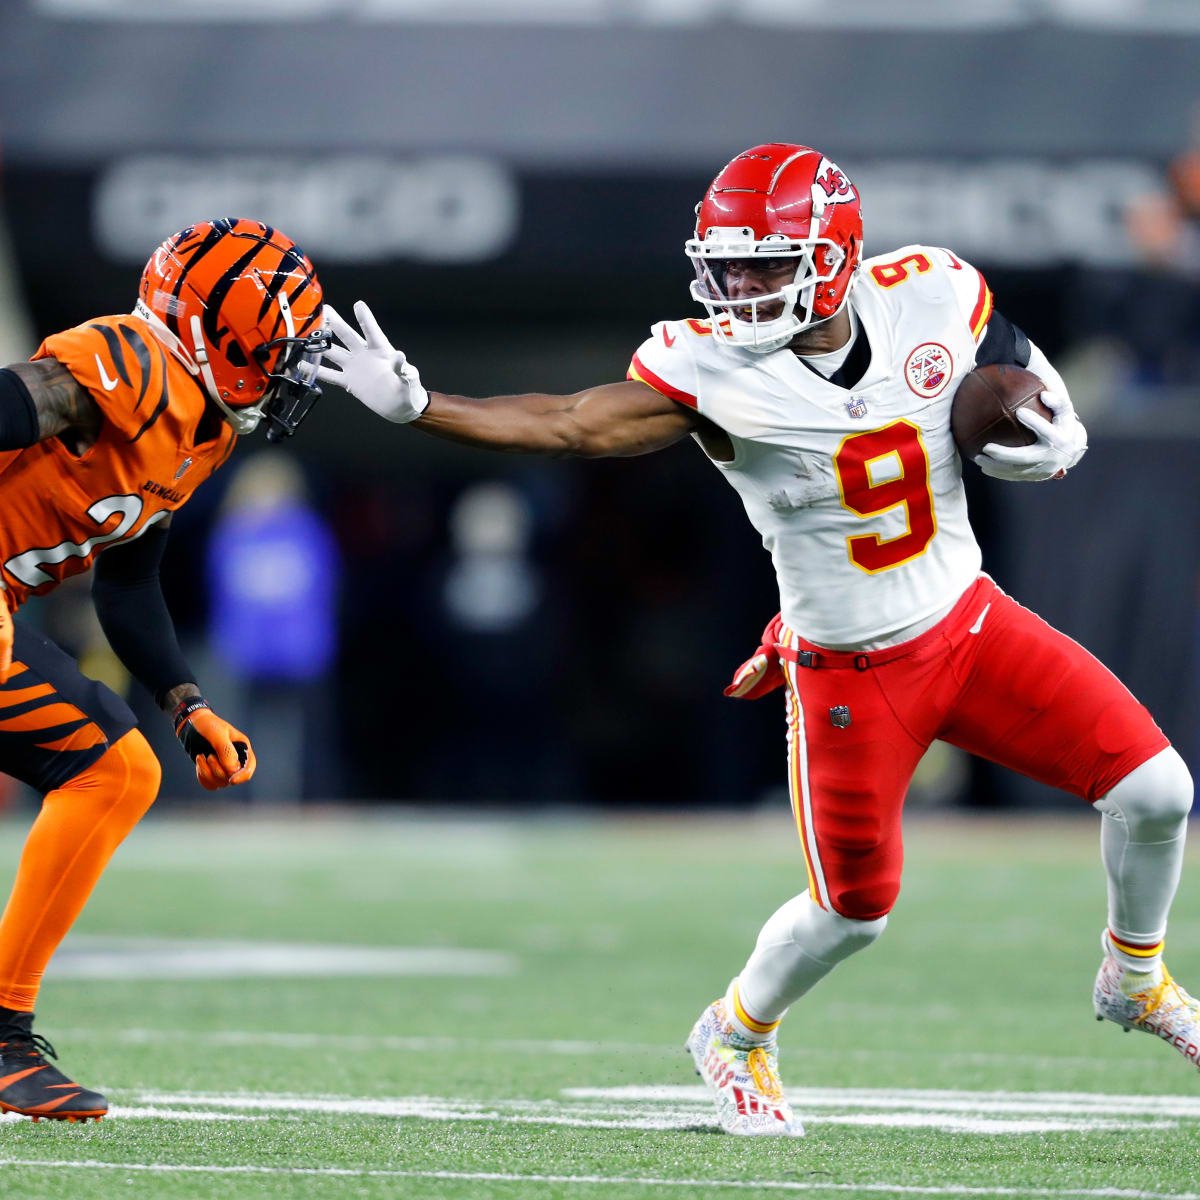 Lessons the KC Chiefs Can Take Into Sunday's AFC Championship Game